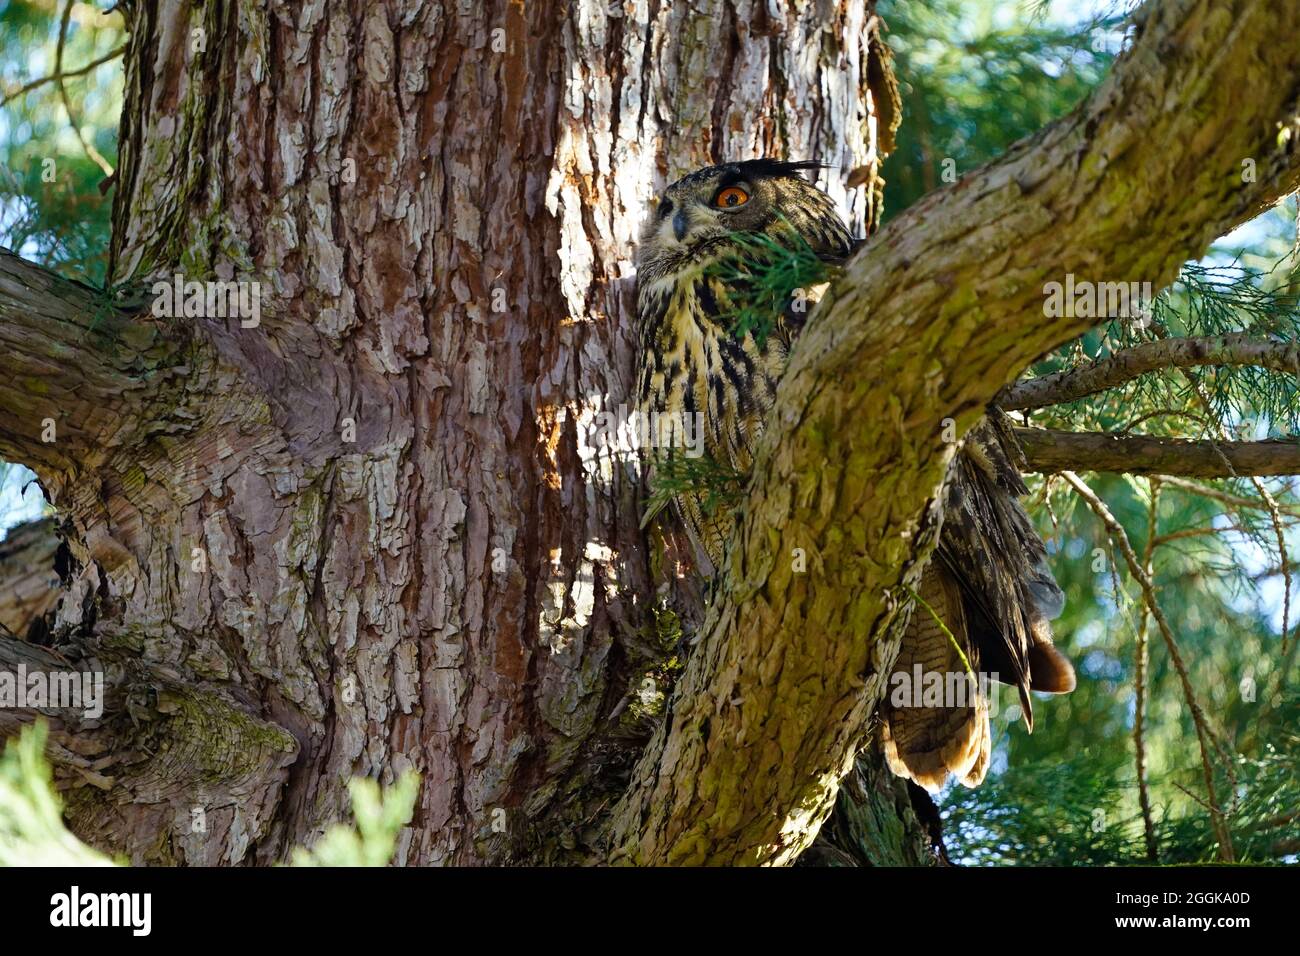 Eagle owl (Bubo bubo) sitting in a tree, wildlife, Black Forest, Baden-Württemberg, Germany, Stock Photo